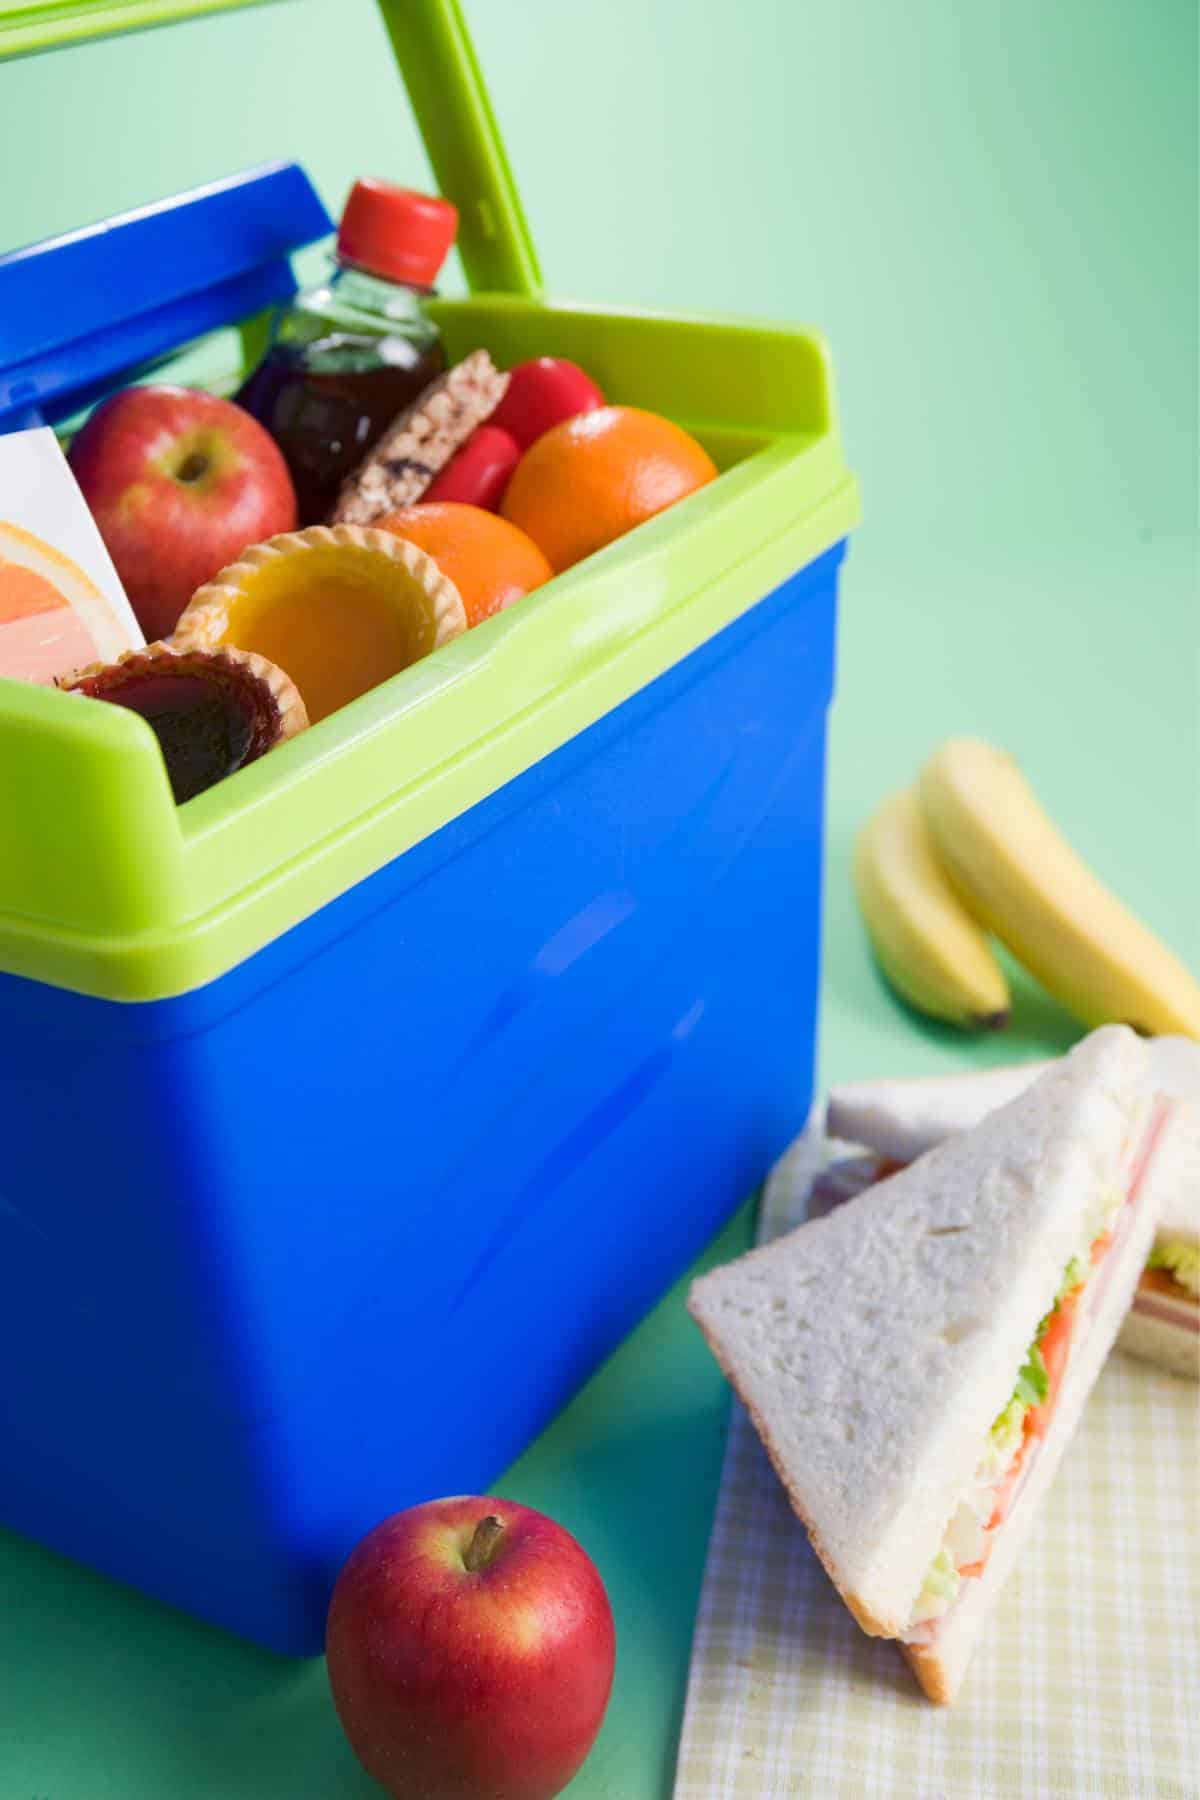 A blue cooler packed with fruits, vegetables and sandwiches